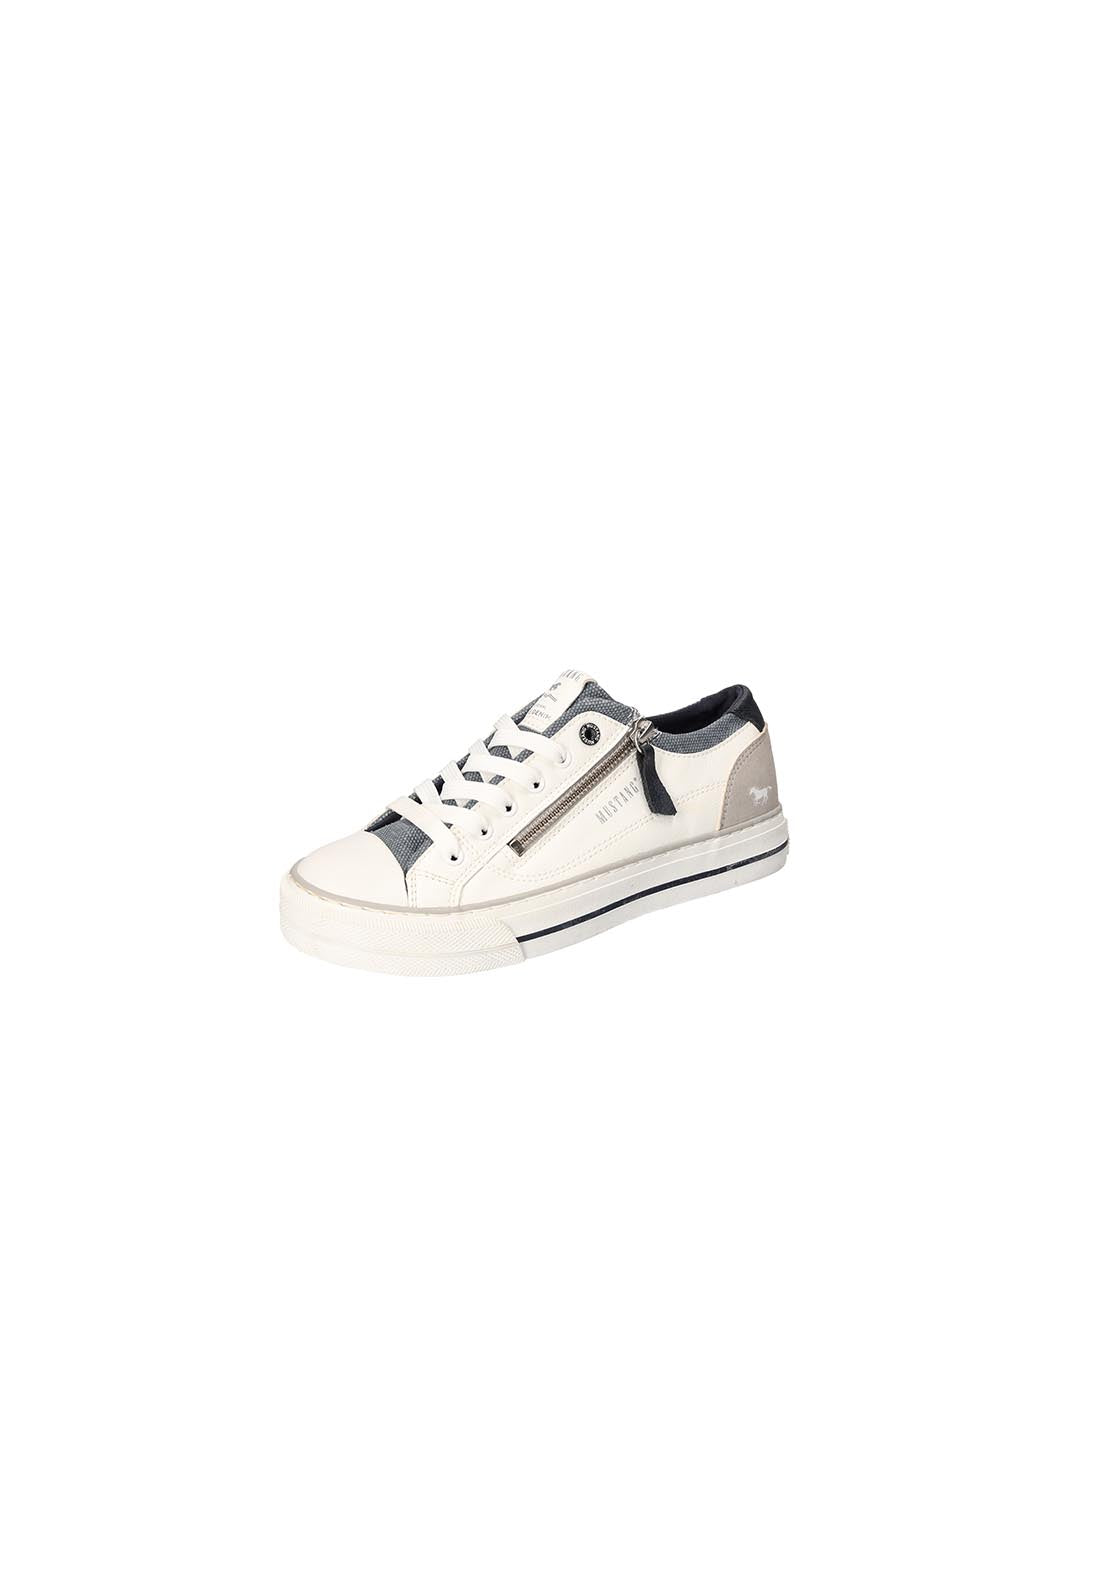 Mustang Lace-Up Zip Trainer - White &amp; Blue 1 Shaws Department Stores